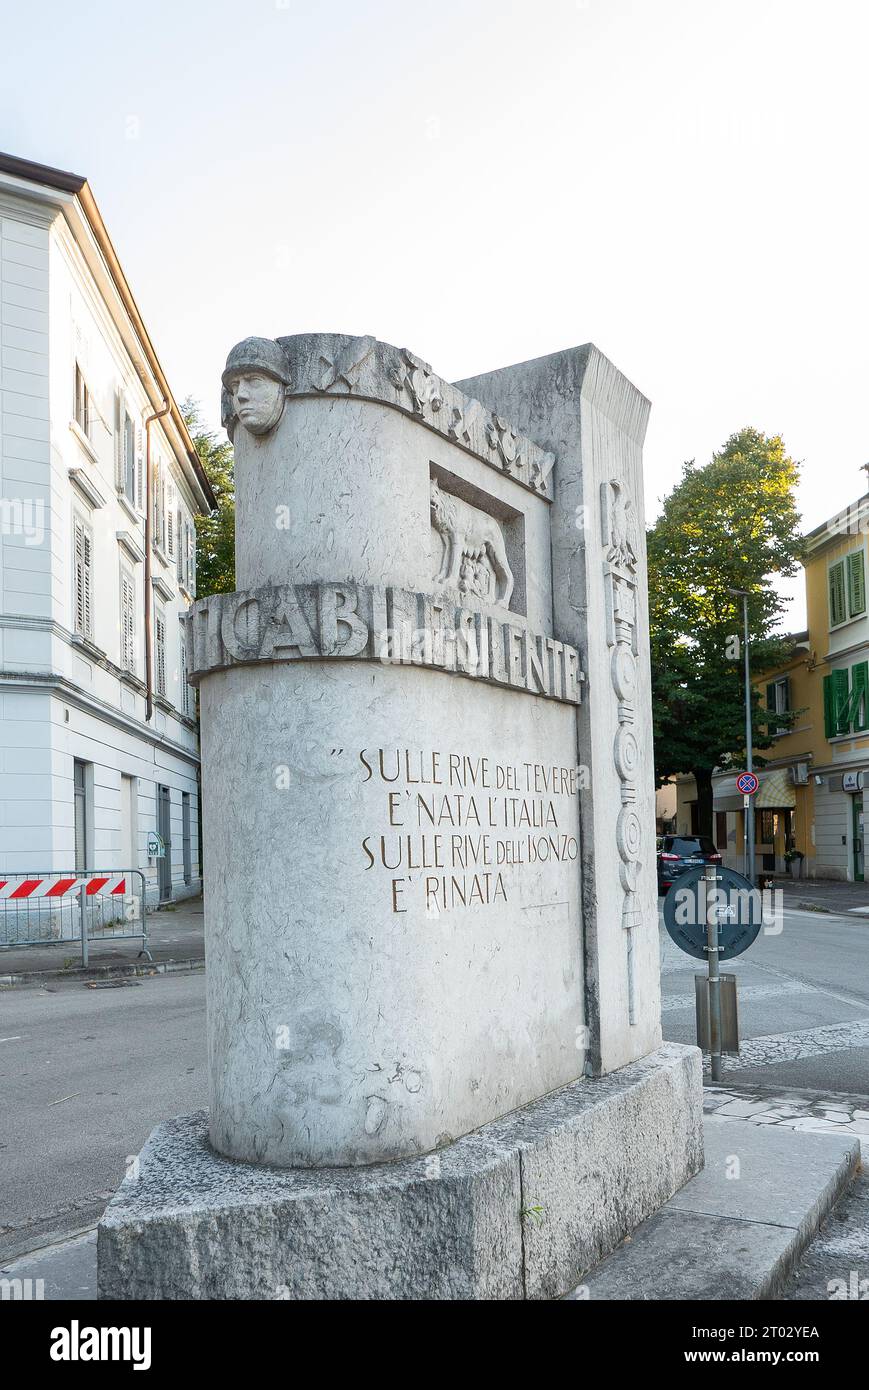 Gorizia, Italy - Stone monument of the Fascist Era dedicated to the battles of the italian army during WW1 on the river Isonzo (Soca) Stock Photo